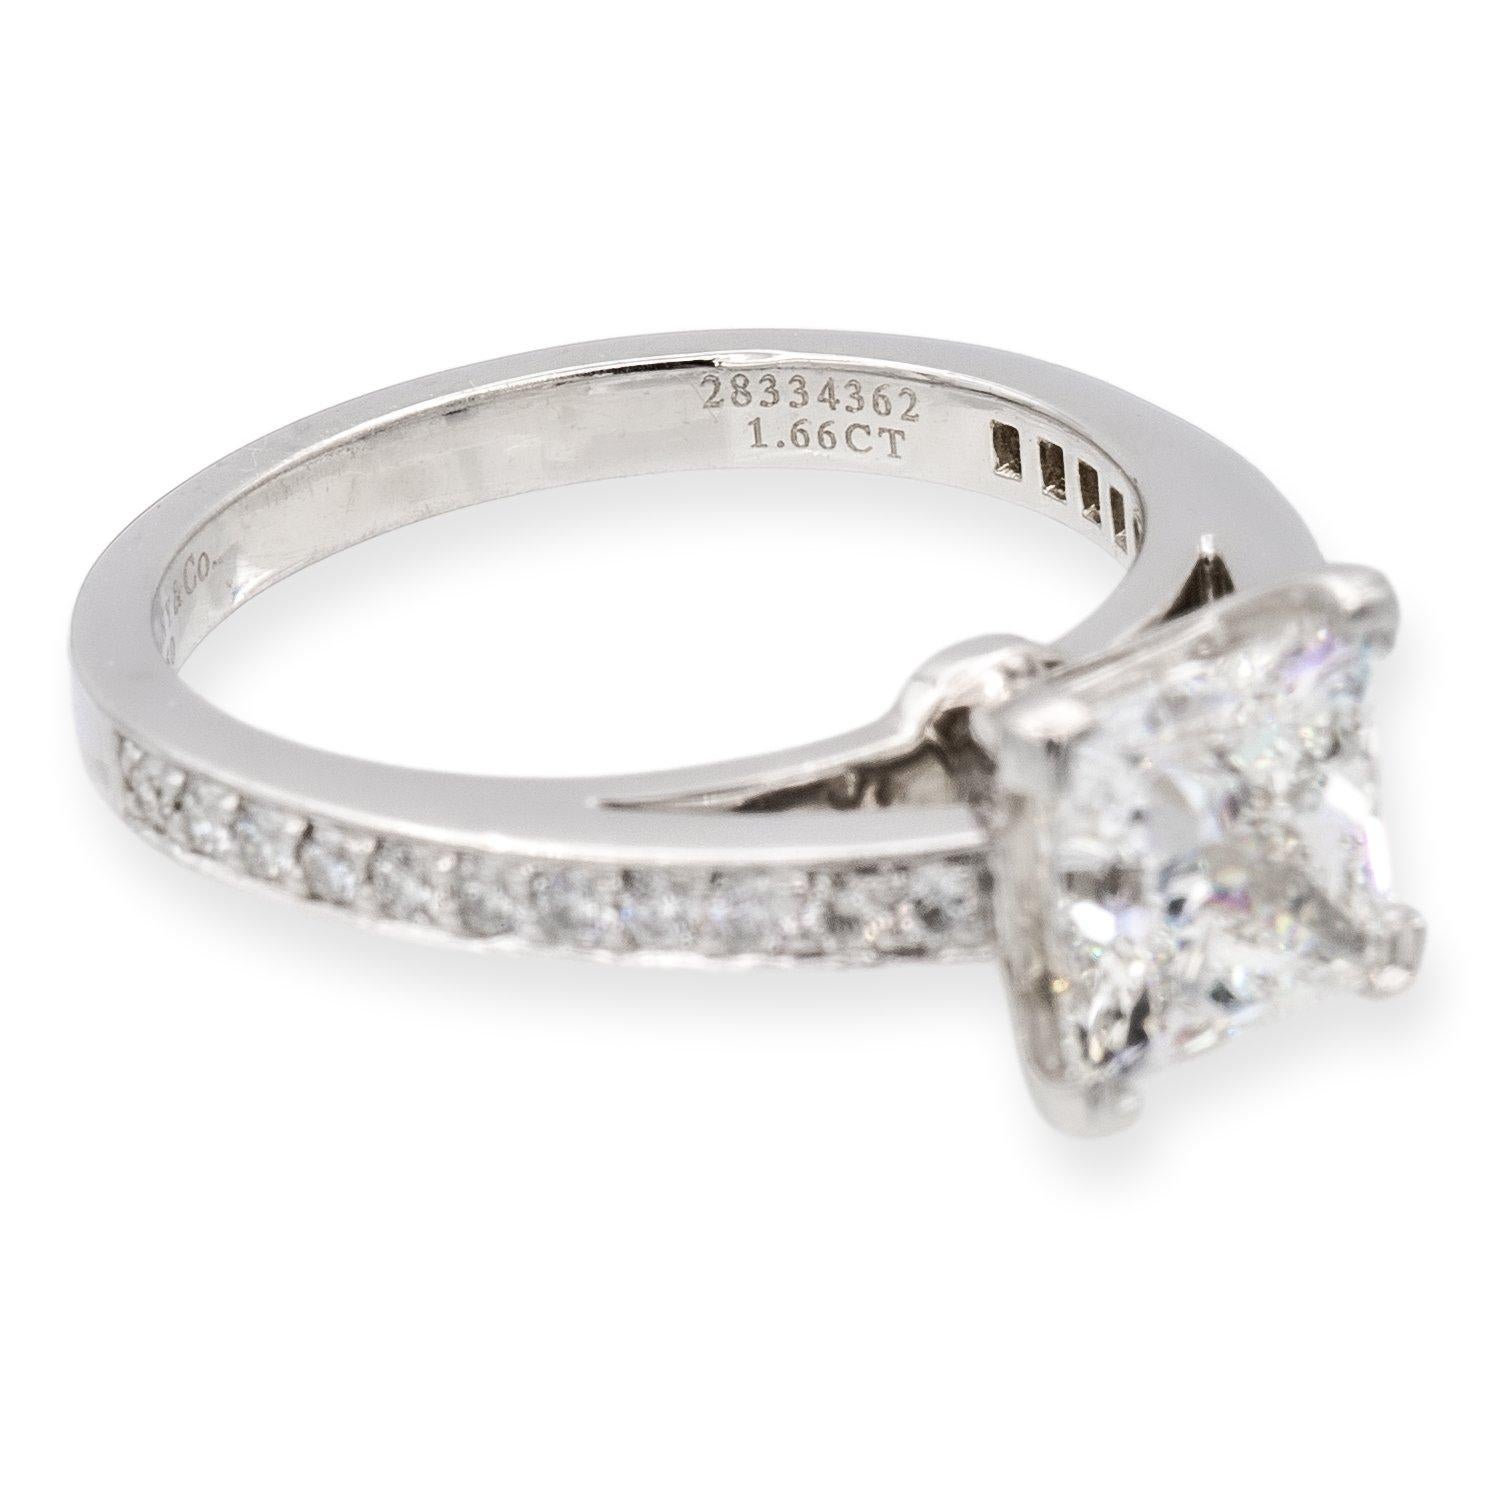 Tiffany & Co. Diamond engagement ring from the Grace collection finely crafted in platinum with an open gallery featuring a square princess cut diamond center weighing 1.66 carats , G color , VVS1 clarity set in a 4 prong basket setting adorned with